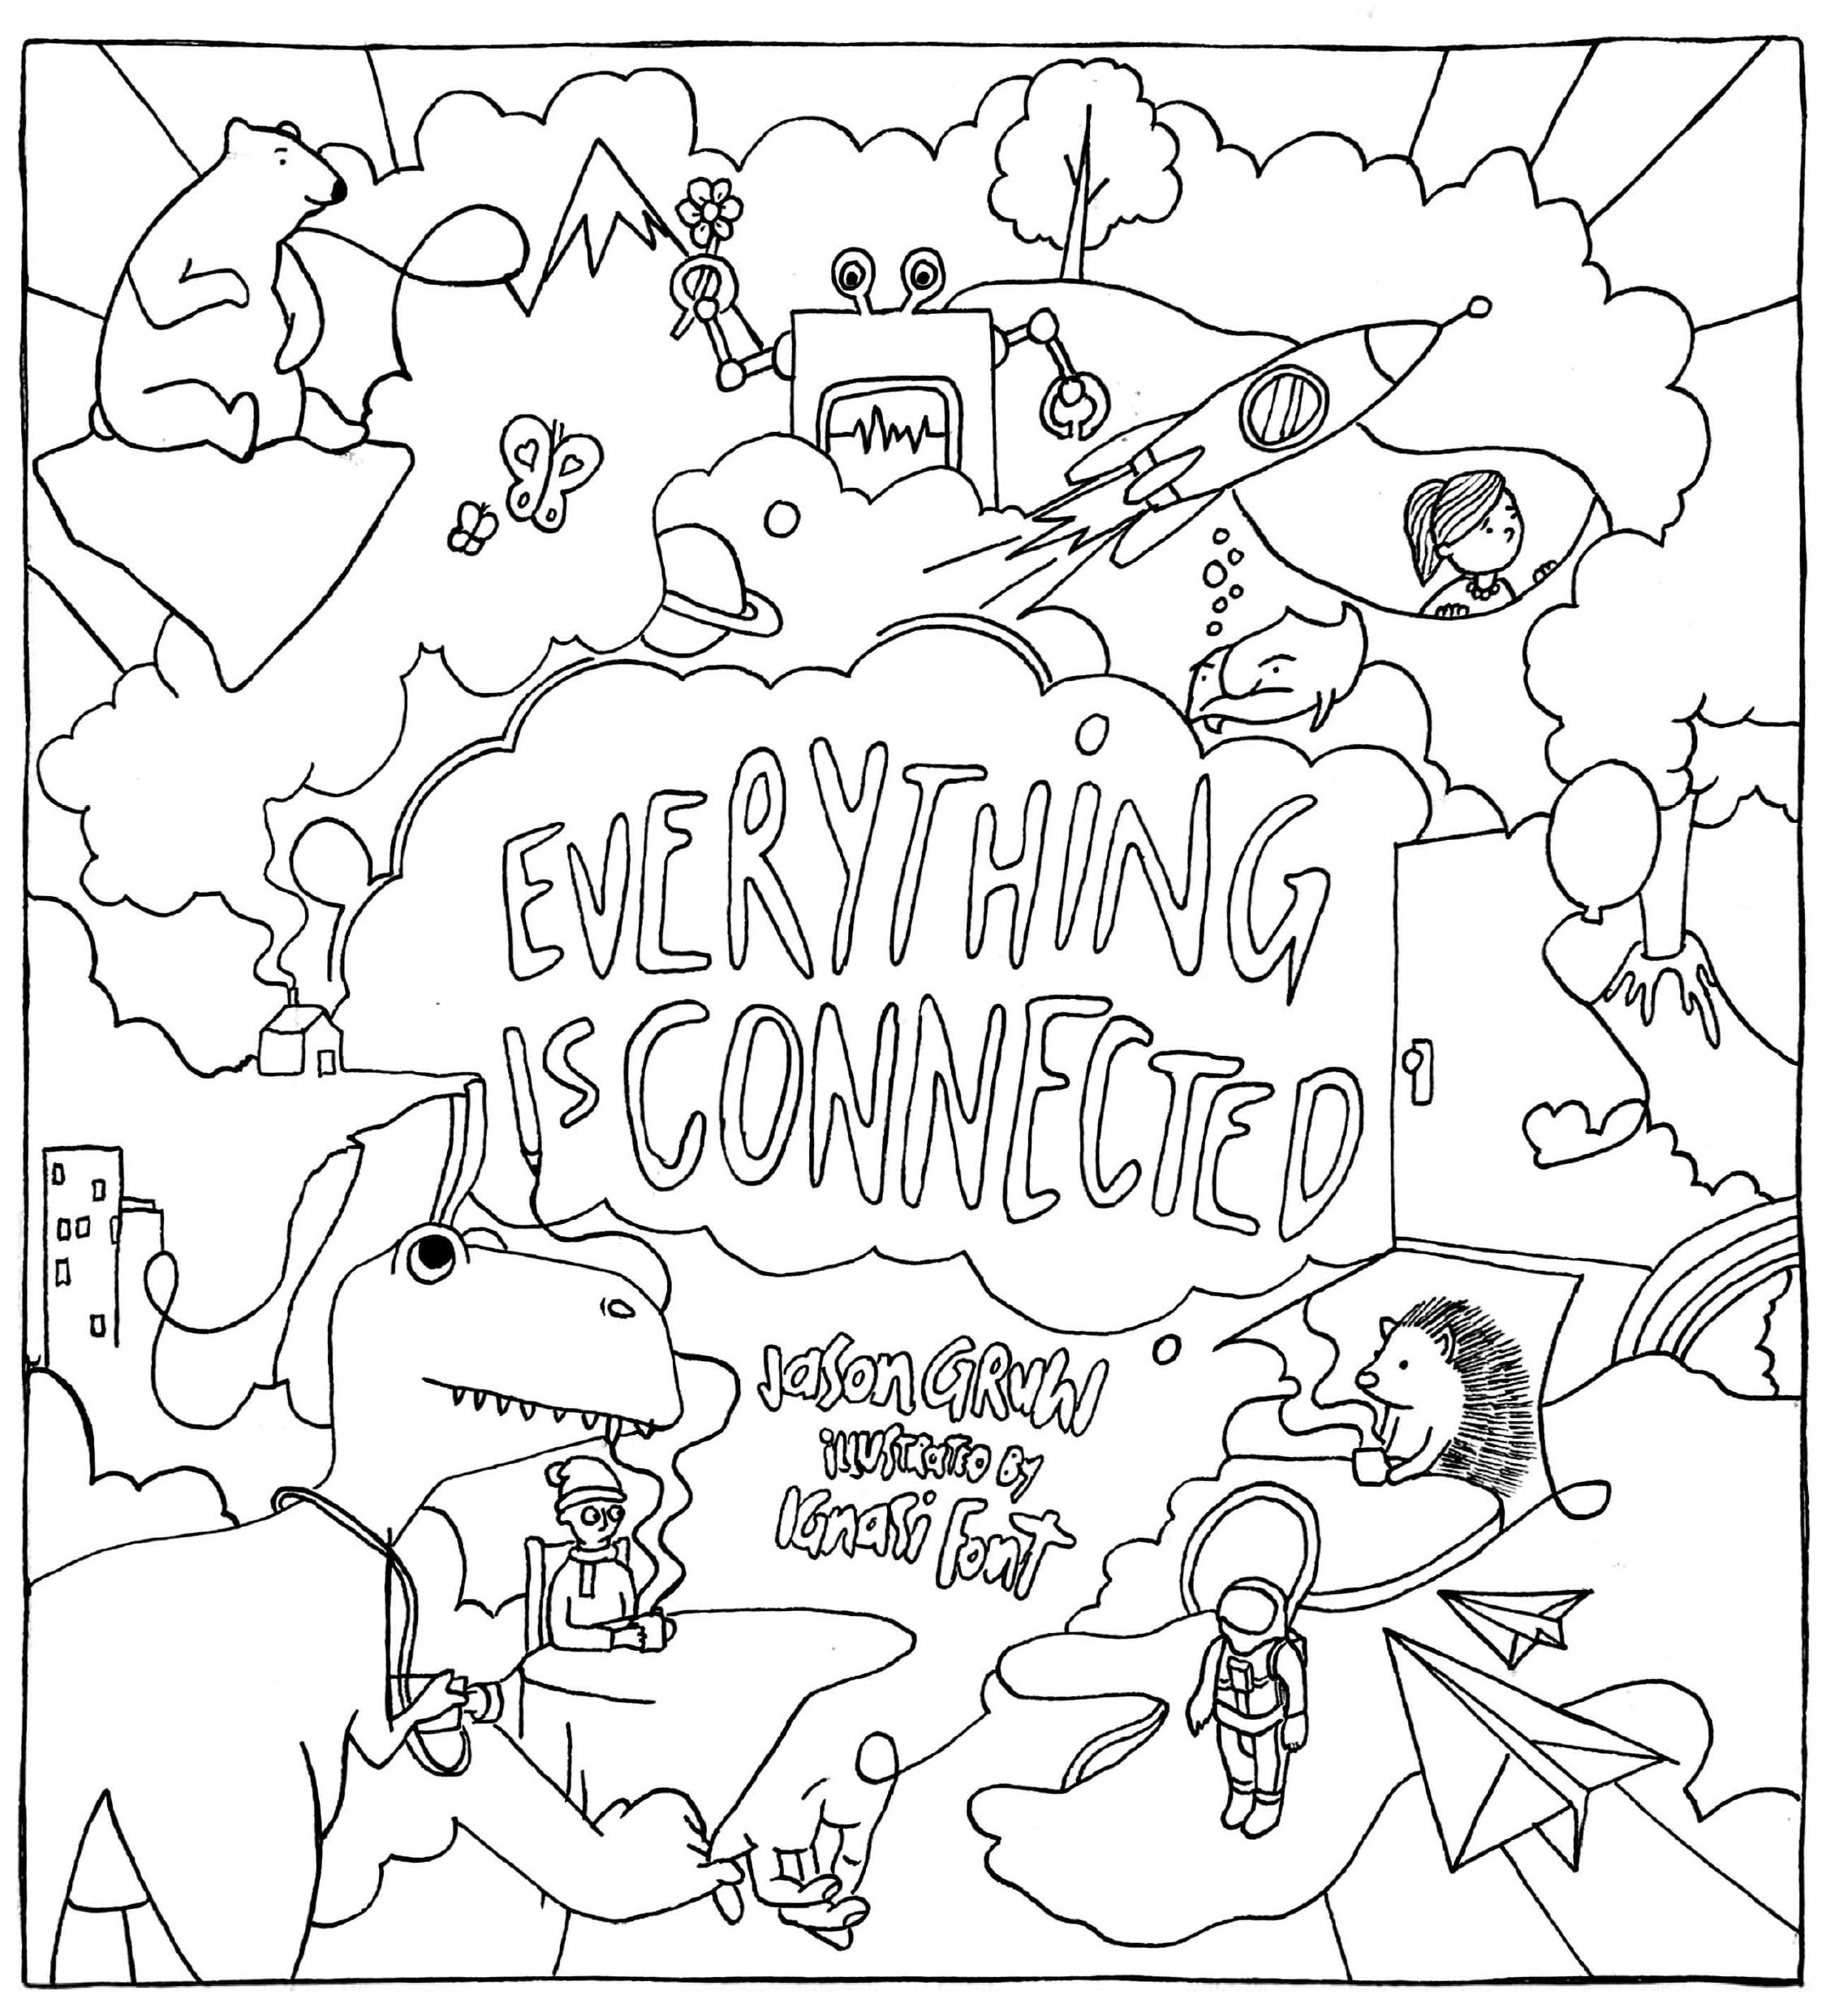 Free Download: Coloring Pages from Everything Is Connected - Middle Way